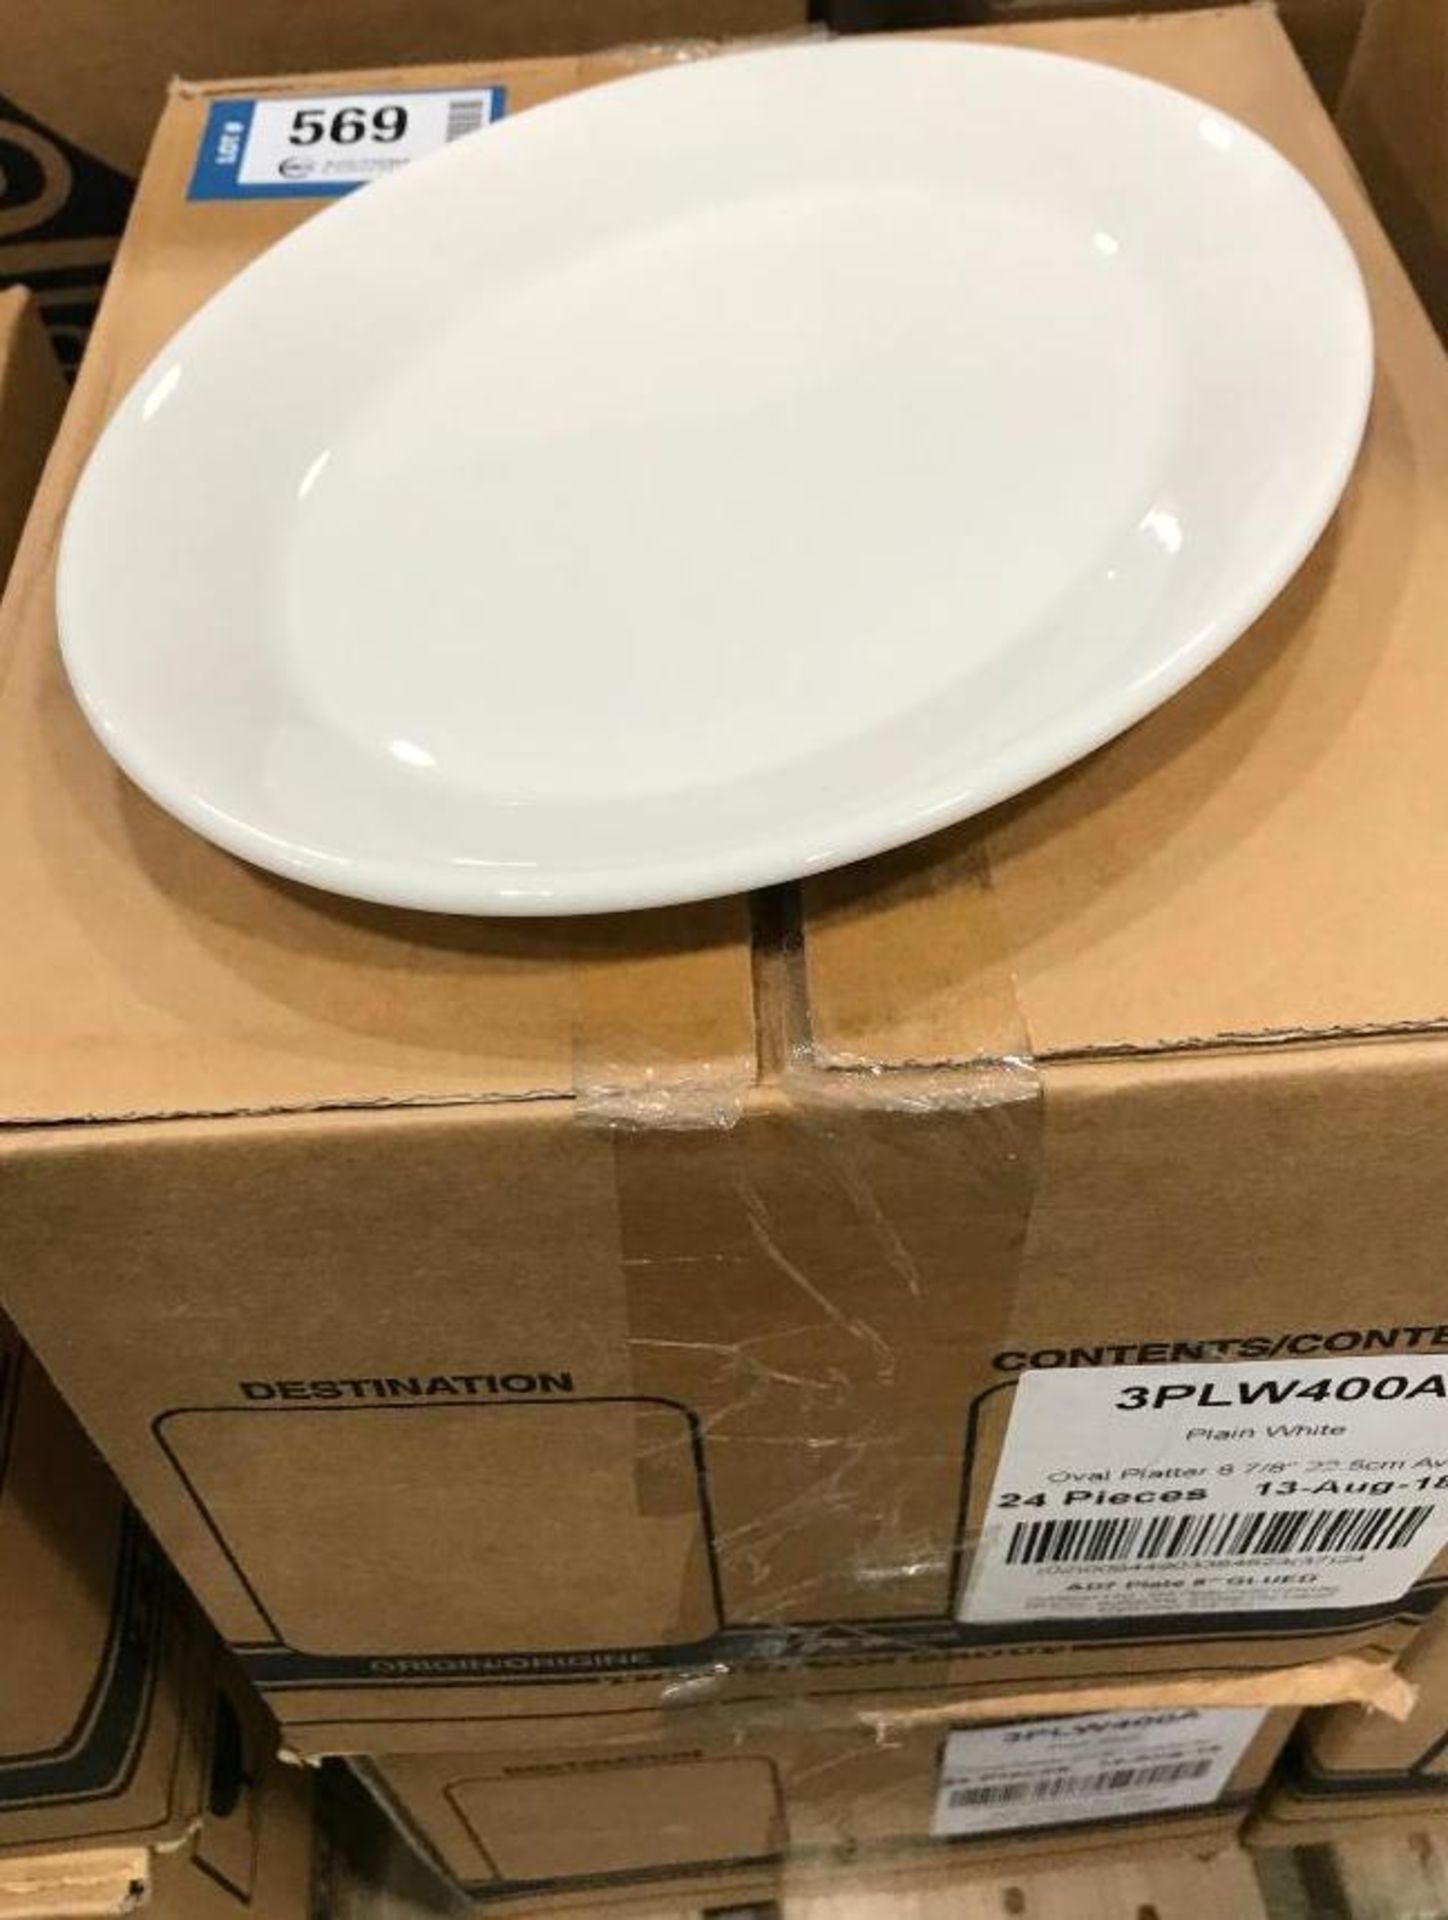 2 CASES OF DUDSON CLASSIC 8 7/8" OVAL PLATTER - 24/CASE, MADE IN ENGLAND